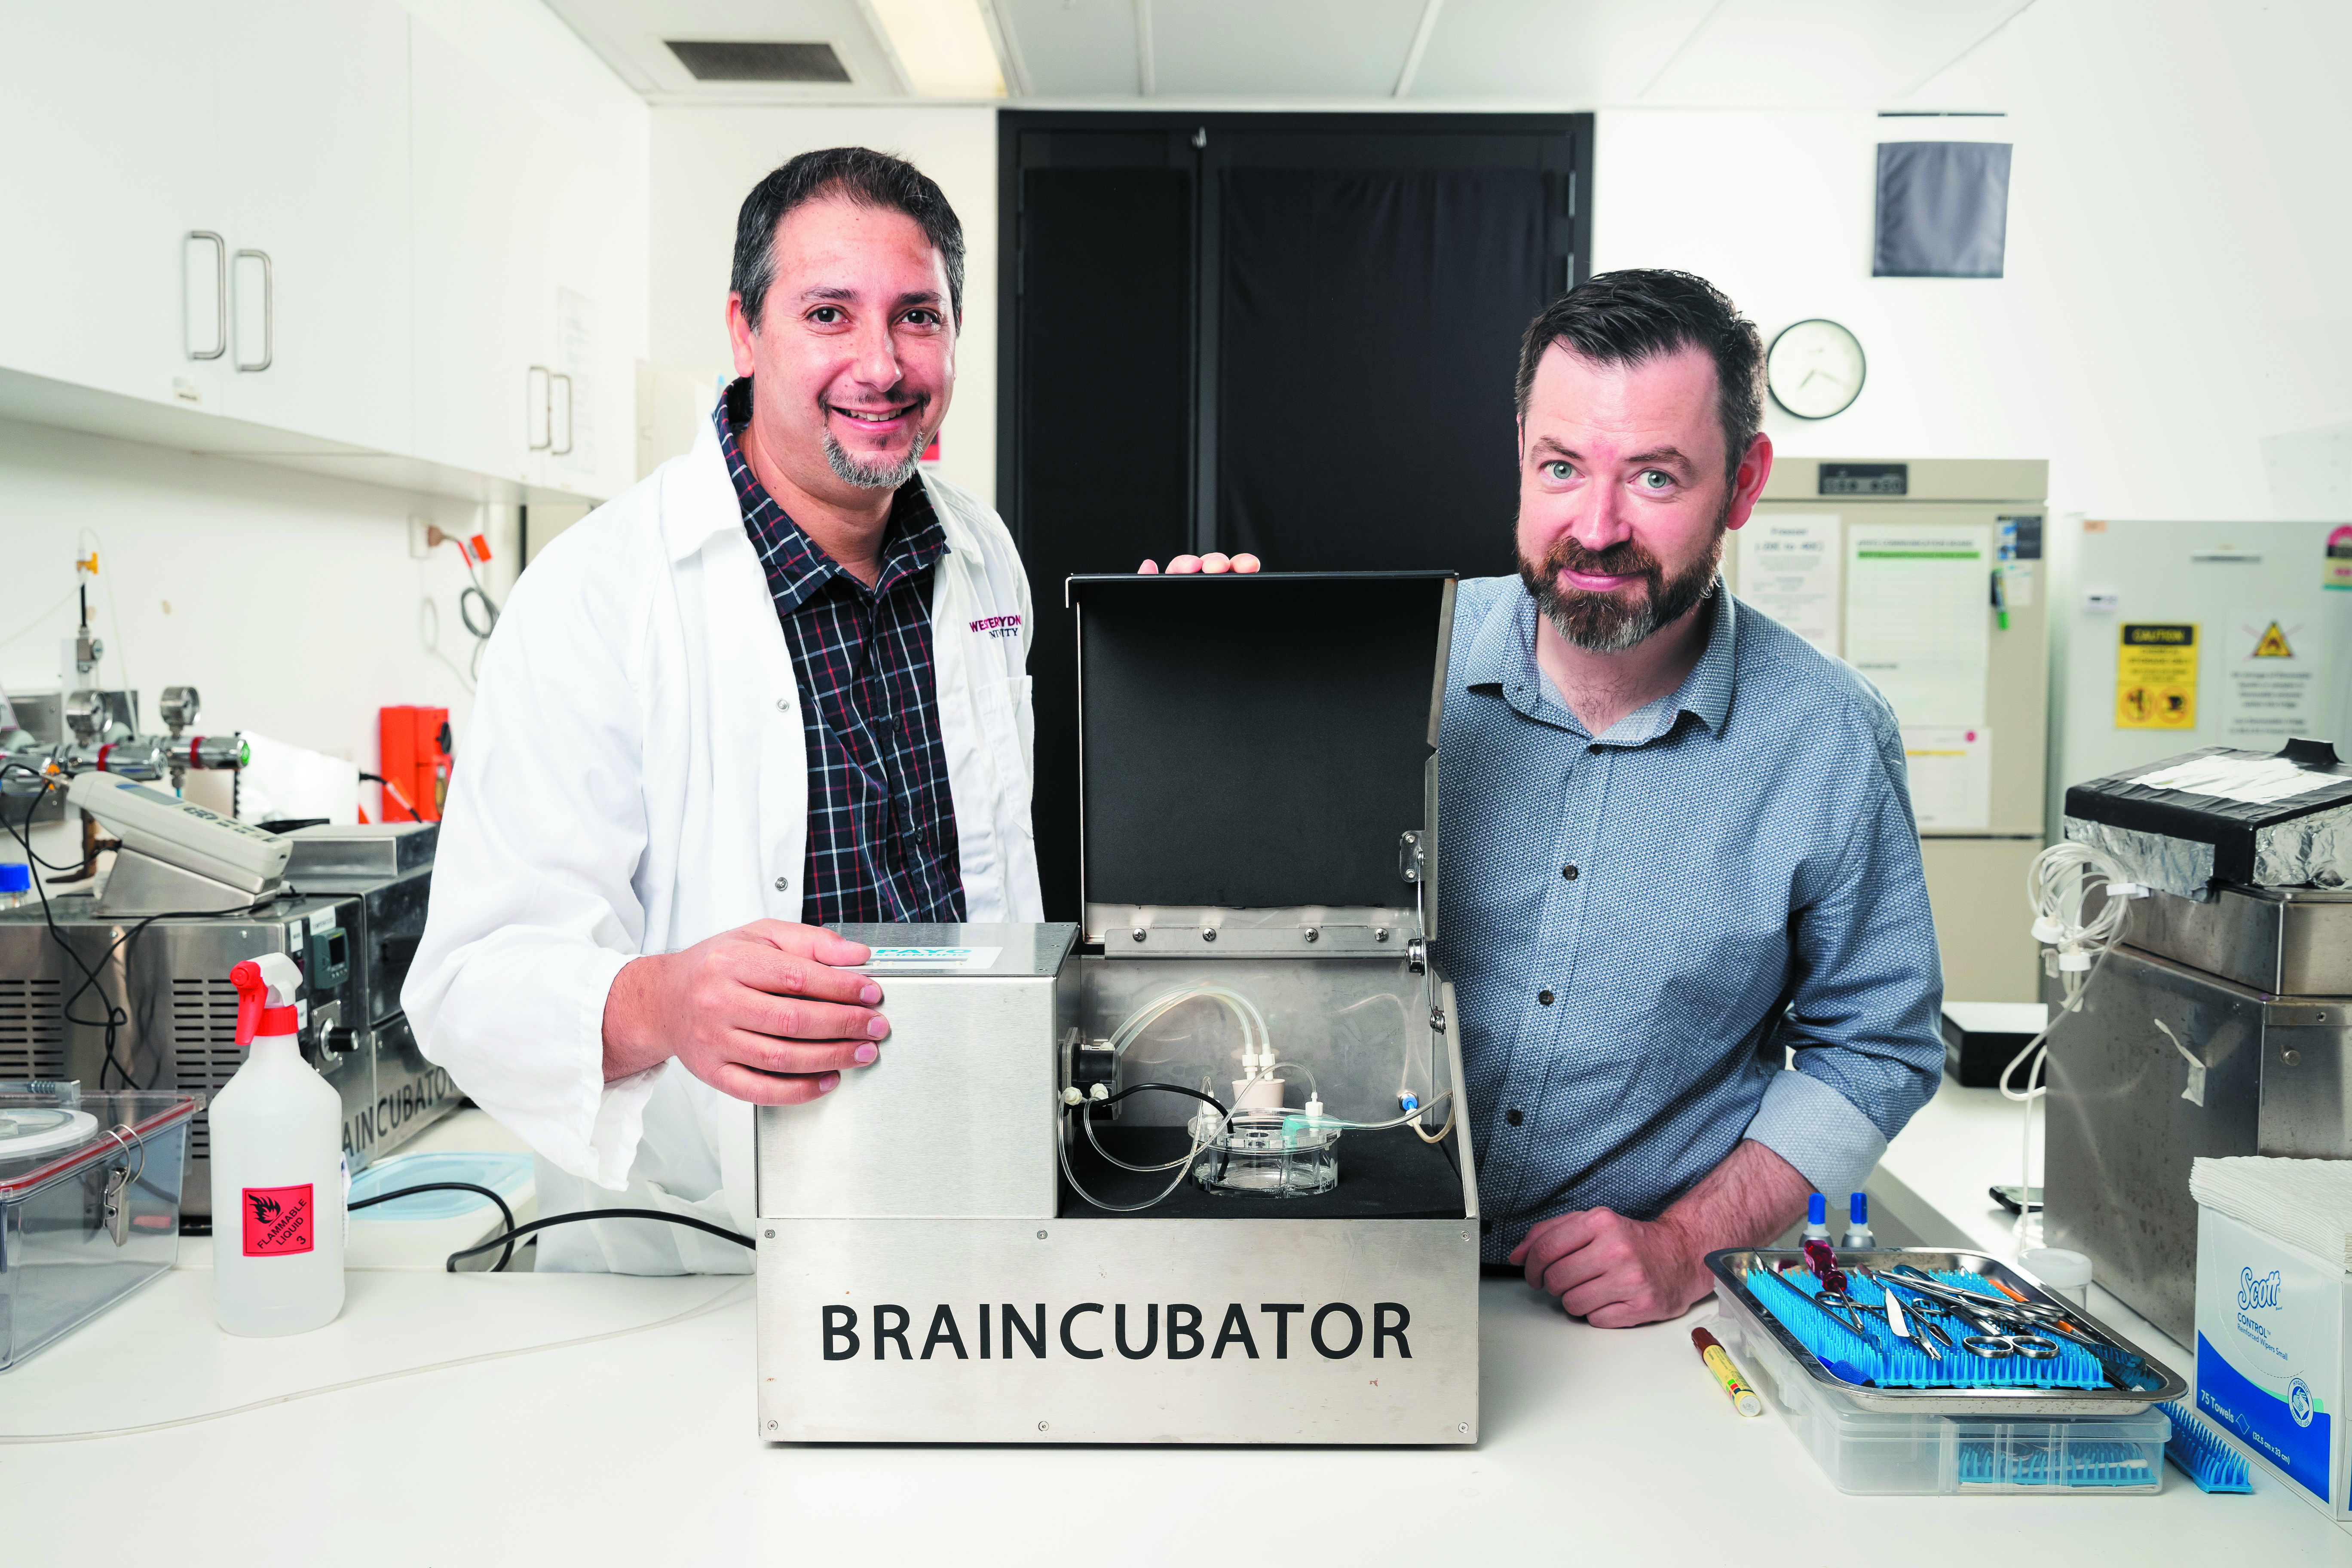 Dr Yossi Buskila (left) and A/Prof. Paul Breen (right) with the Braincubator.